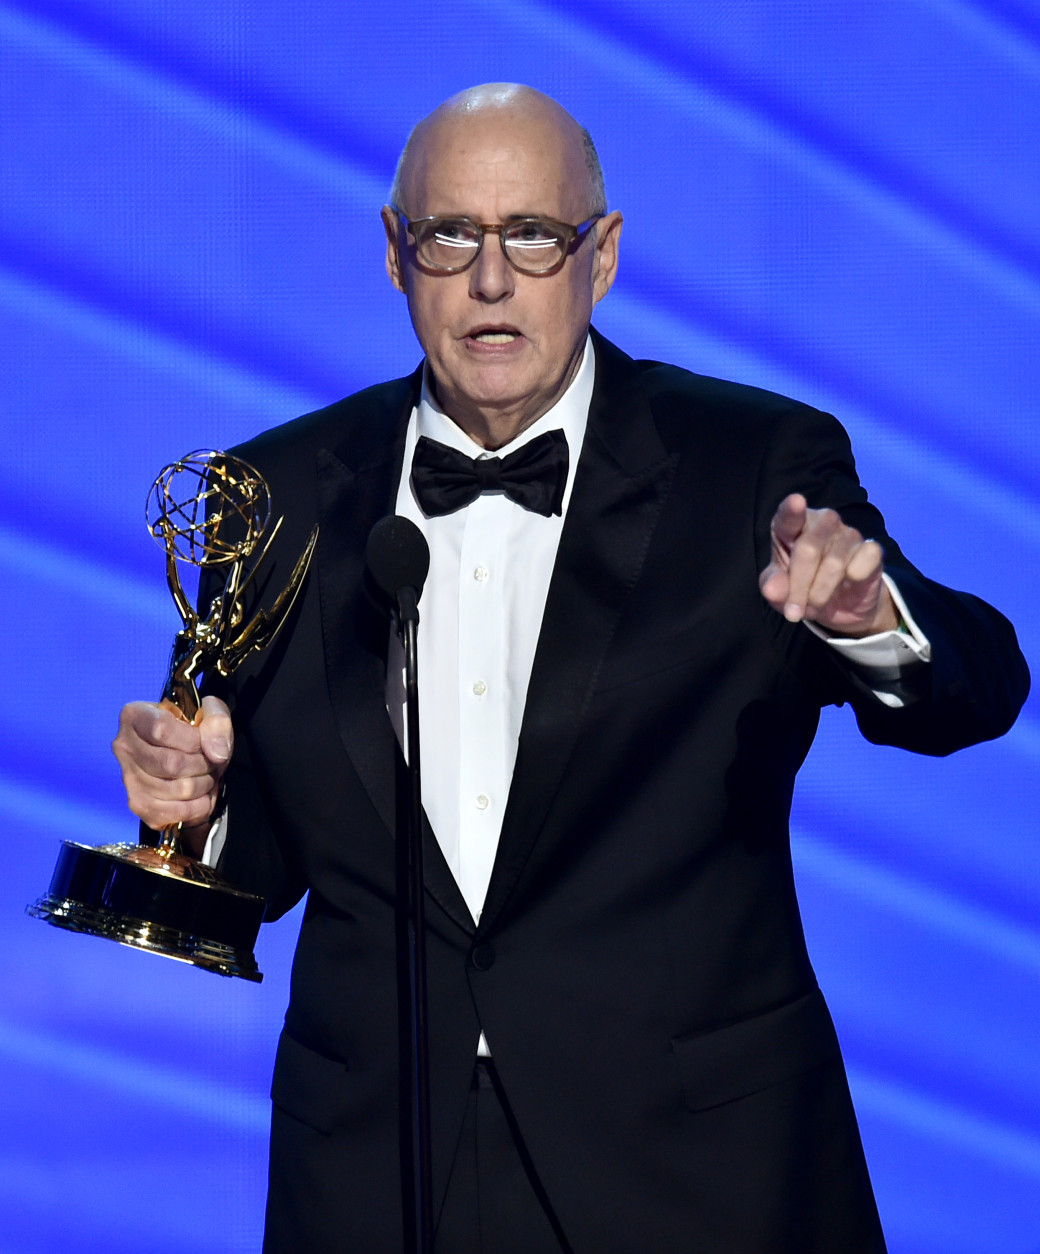 Jeffrey Tambor accepts the award for outstanding lead actor in a comedy series for Transparent at the 68th Primetime Emmy Awards on Sunday, Sept. 18, 2016, at the Microsoft Theater in Los Angeles. (Photo by Vince Bucci/Invision for the Television Academy/AP Images)